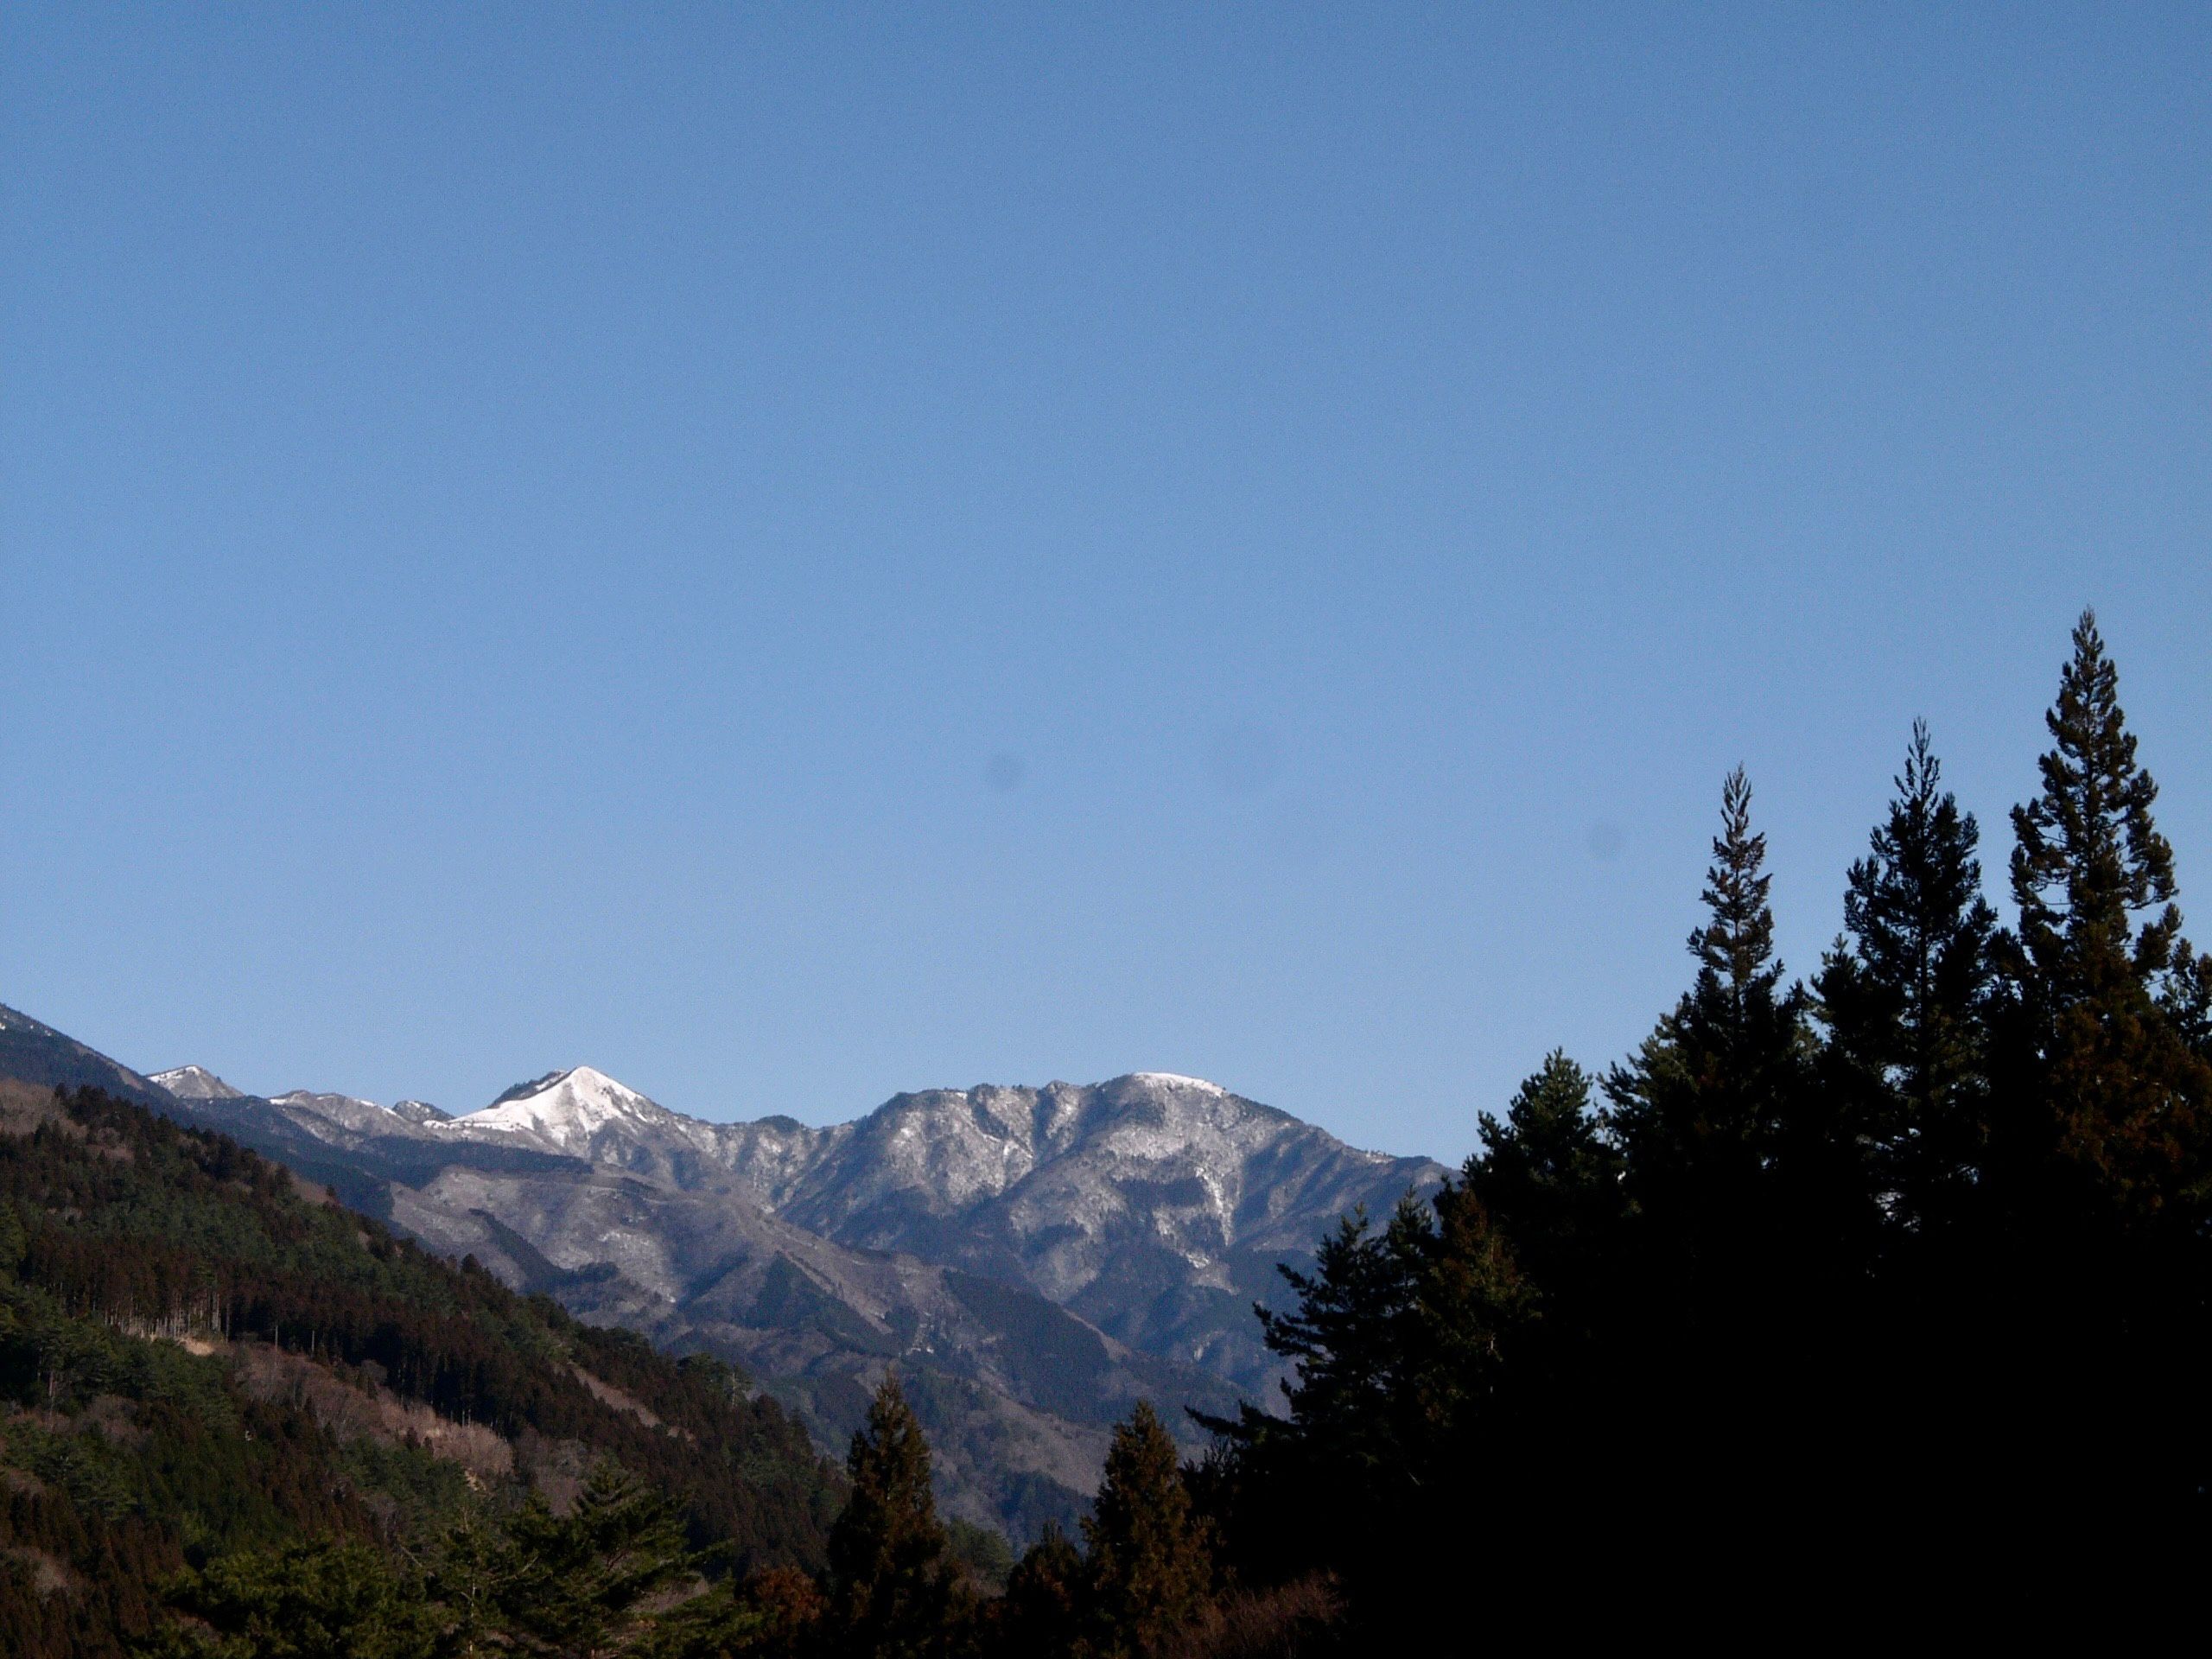 A panorama of forested mountains on a clear winter day, with a snowy pyramid, Mount Tenguzuka, on the horizon.